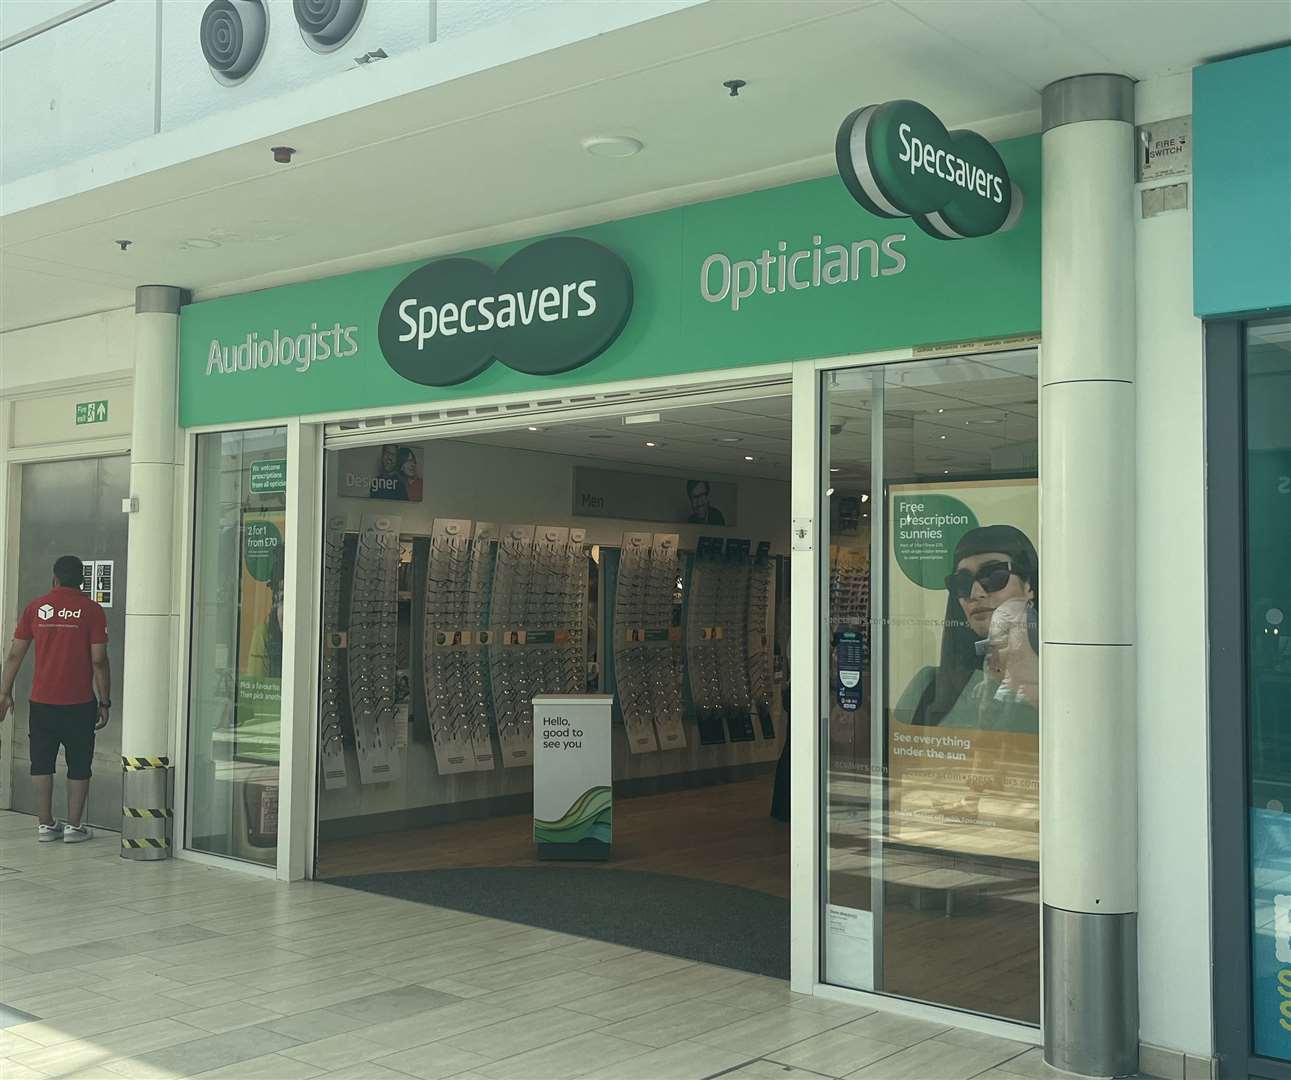 Specsavers is moving from its existing unit next to EE in County Square; it is unclear what will happen to its current home